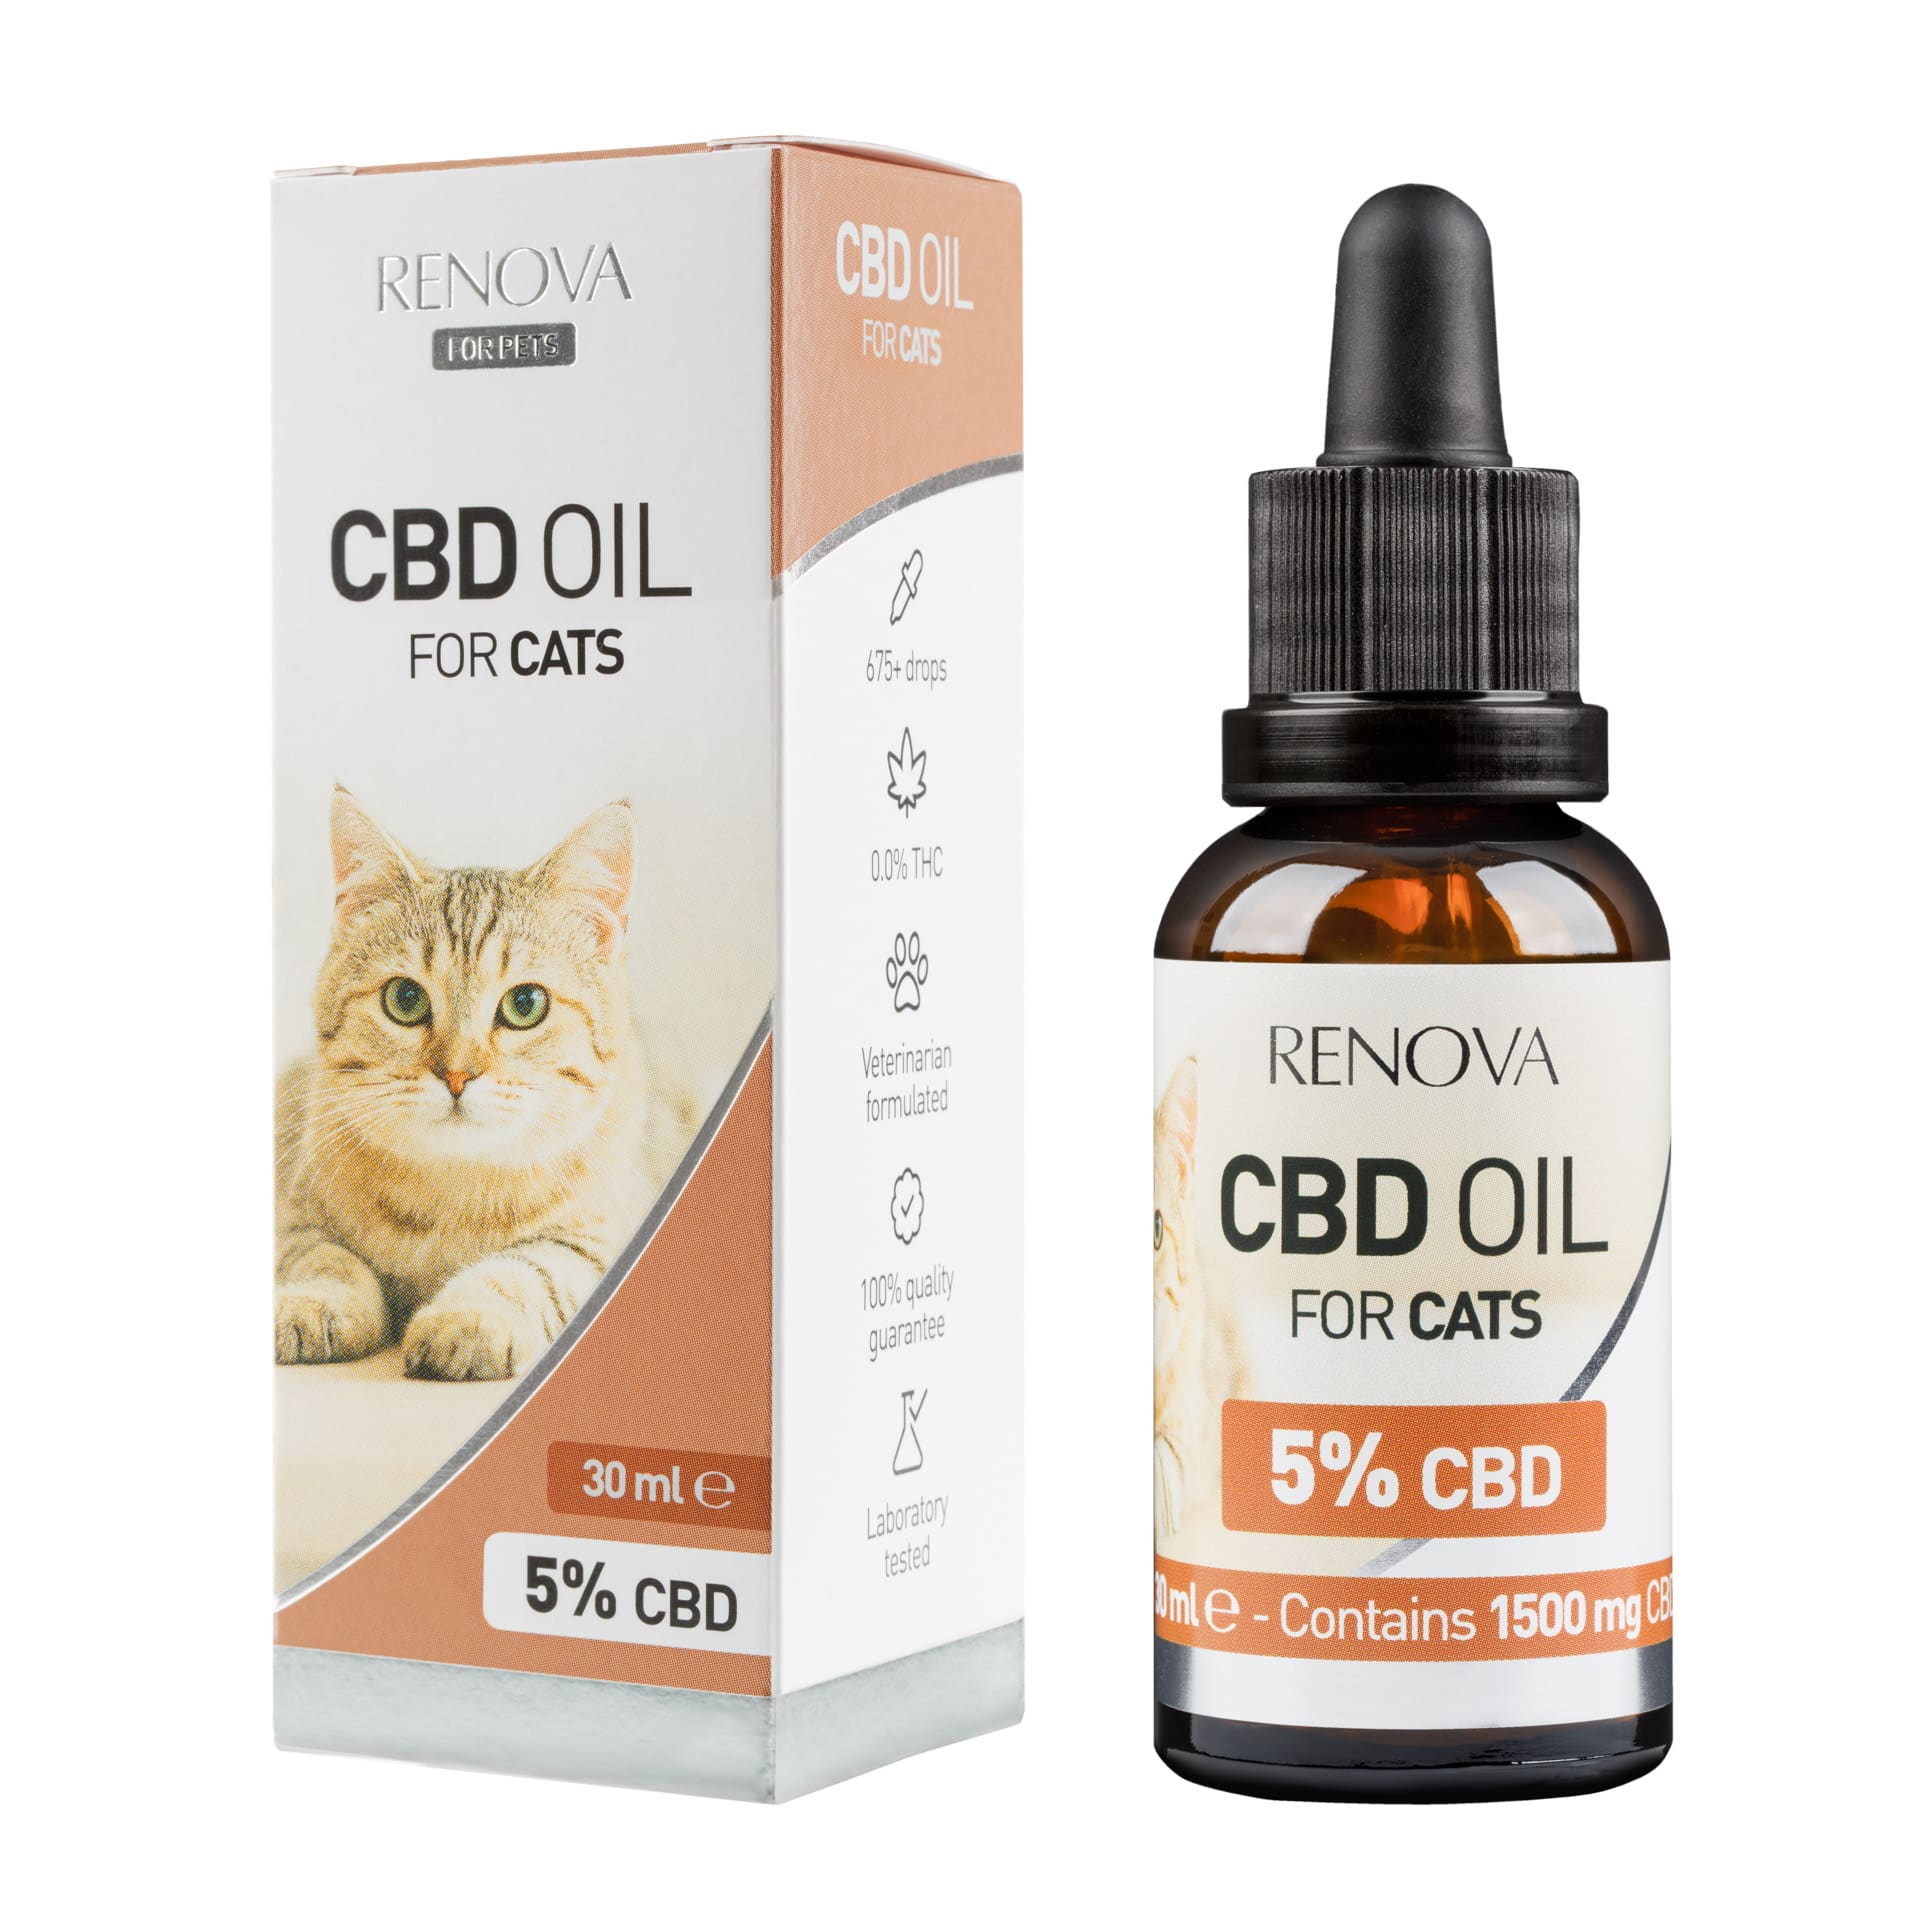 A bottle of Renova CBD oil 5% for cats (30ml) next to a box of Renova CBD oil 5% for cats (30ml).